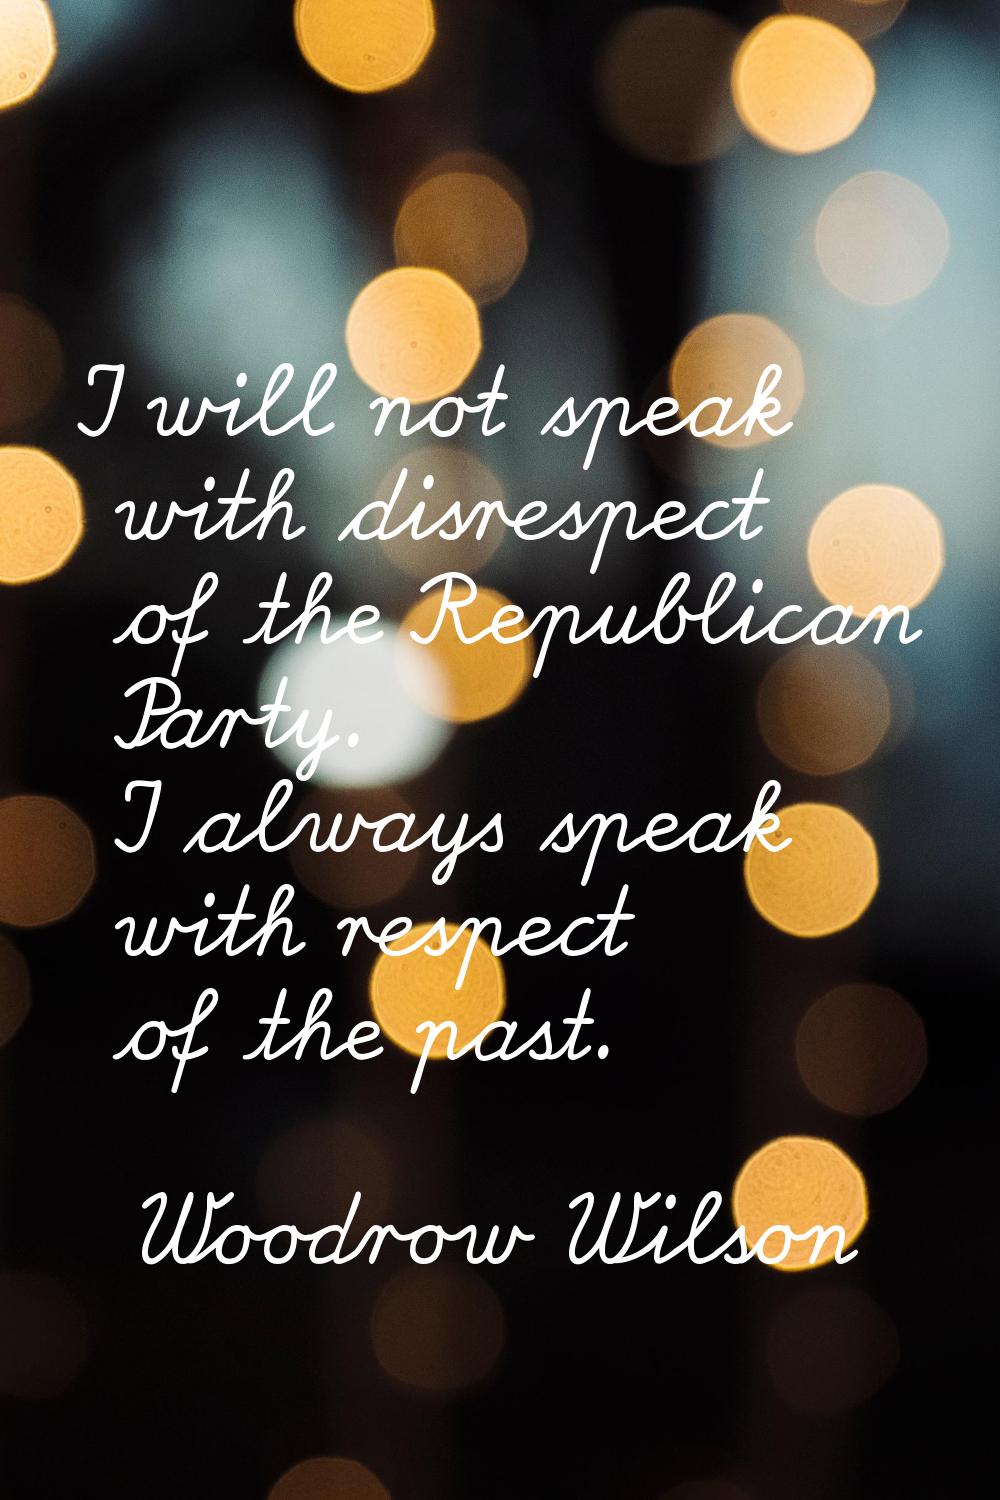 I will not speak with disrespect of the Republican Party. I always speak with respect of the past.